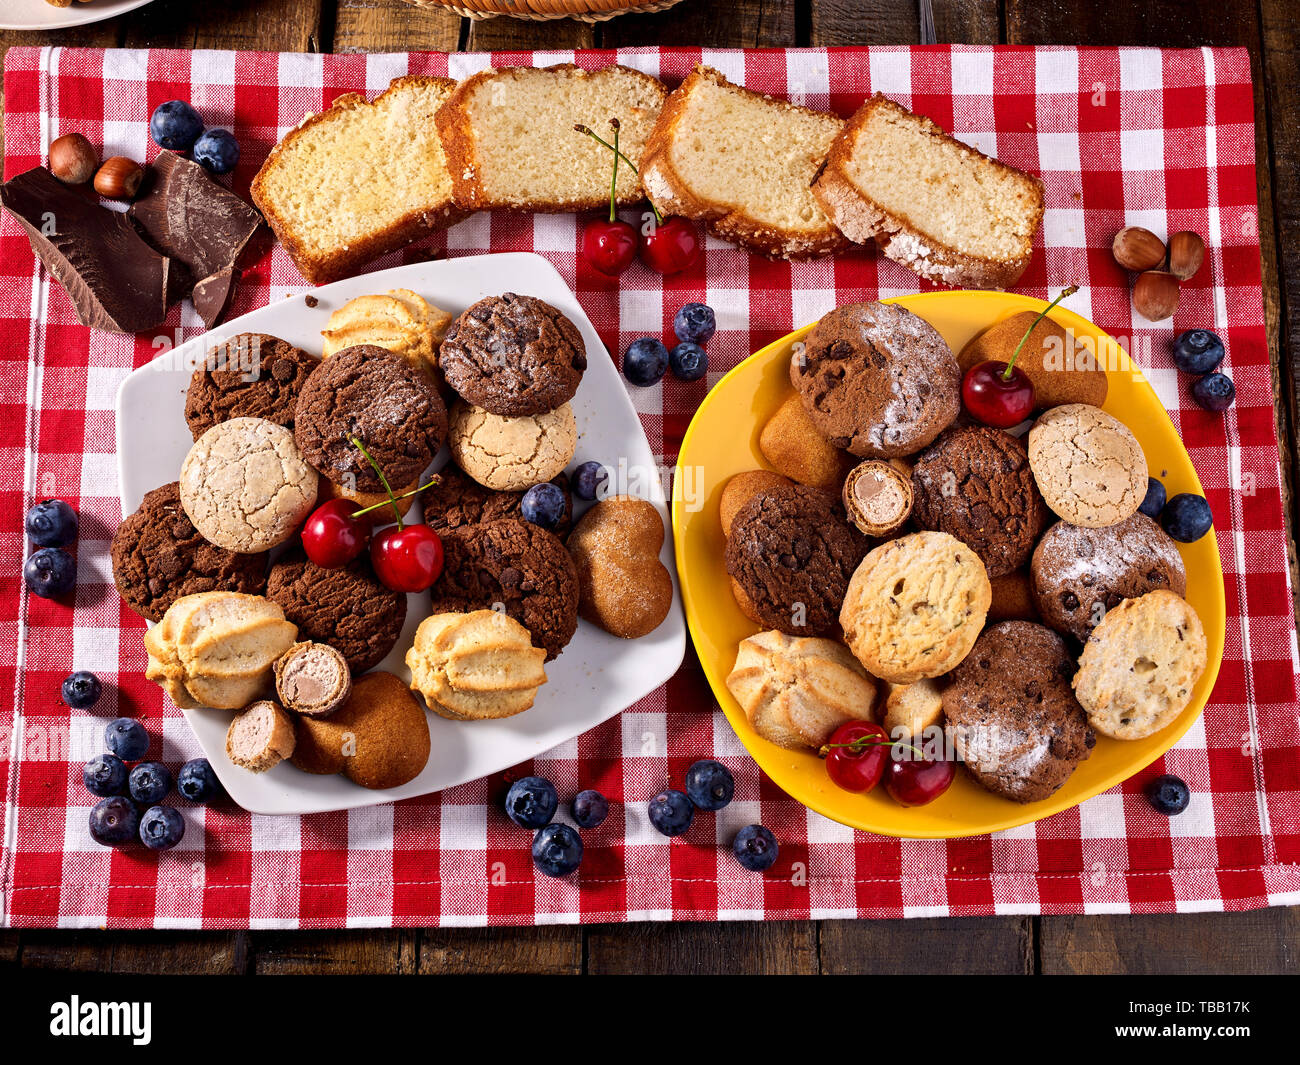 Oatmeal Cookies and sand chocolate cake with blueberries sun flare Stock Photo